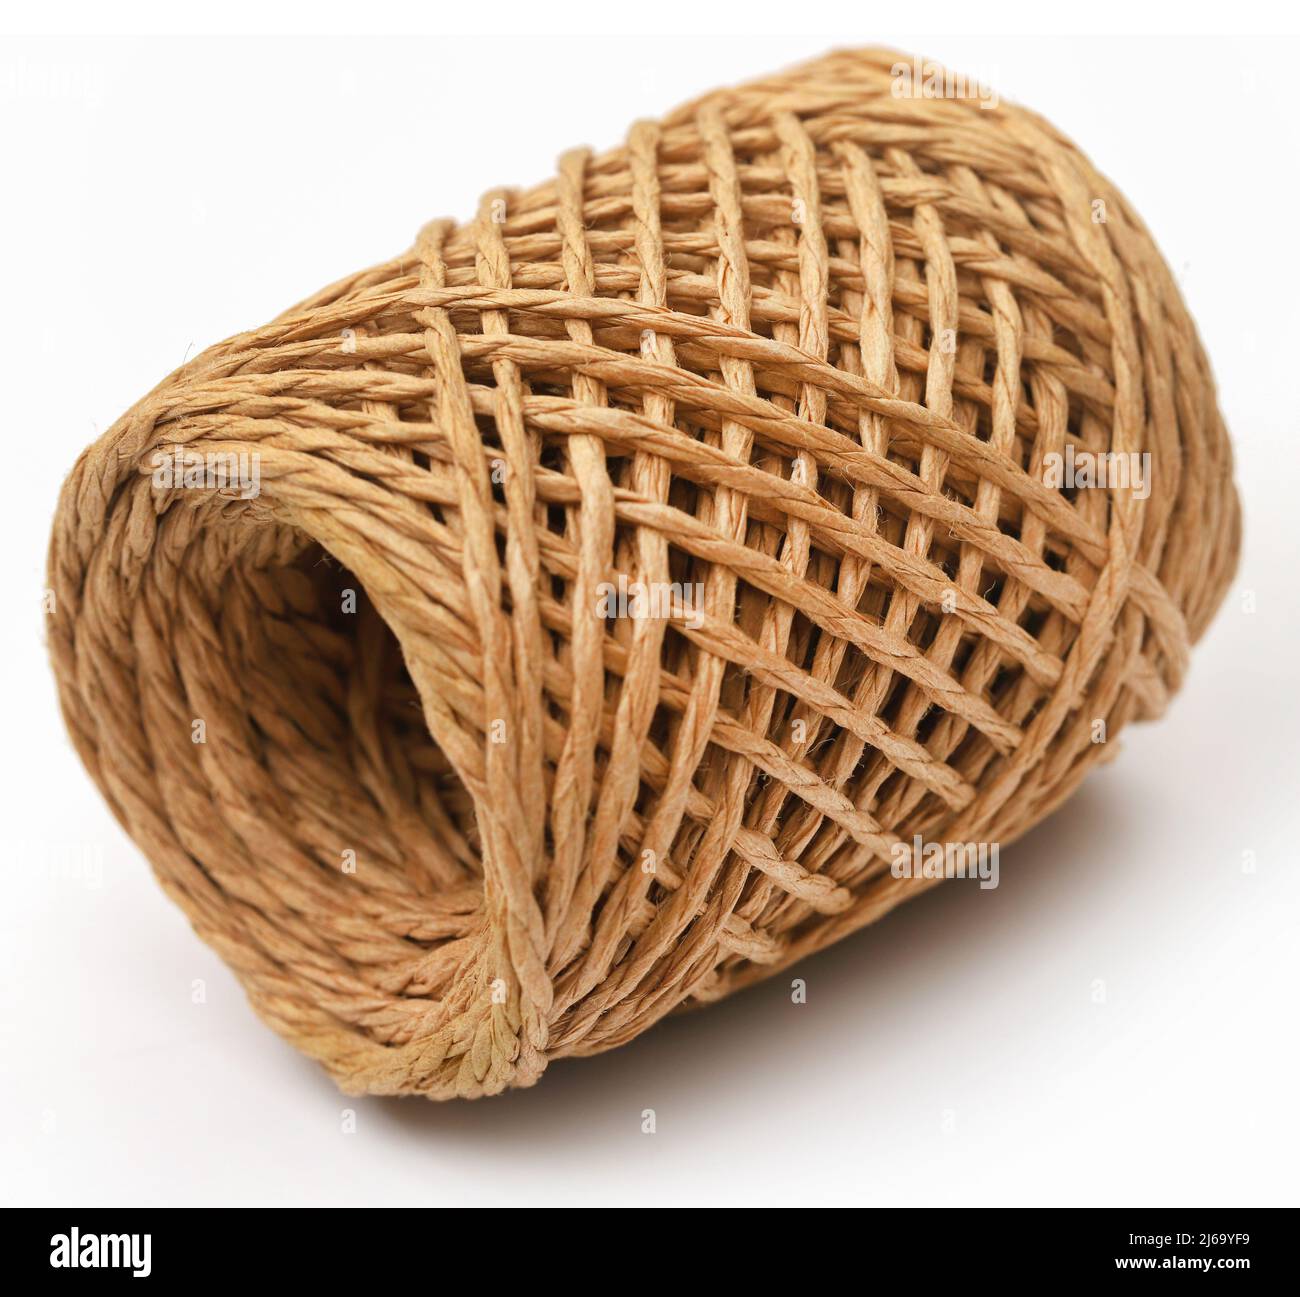 Thread ball made of natural jute fiber over white background Stock Photo